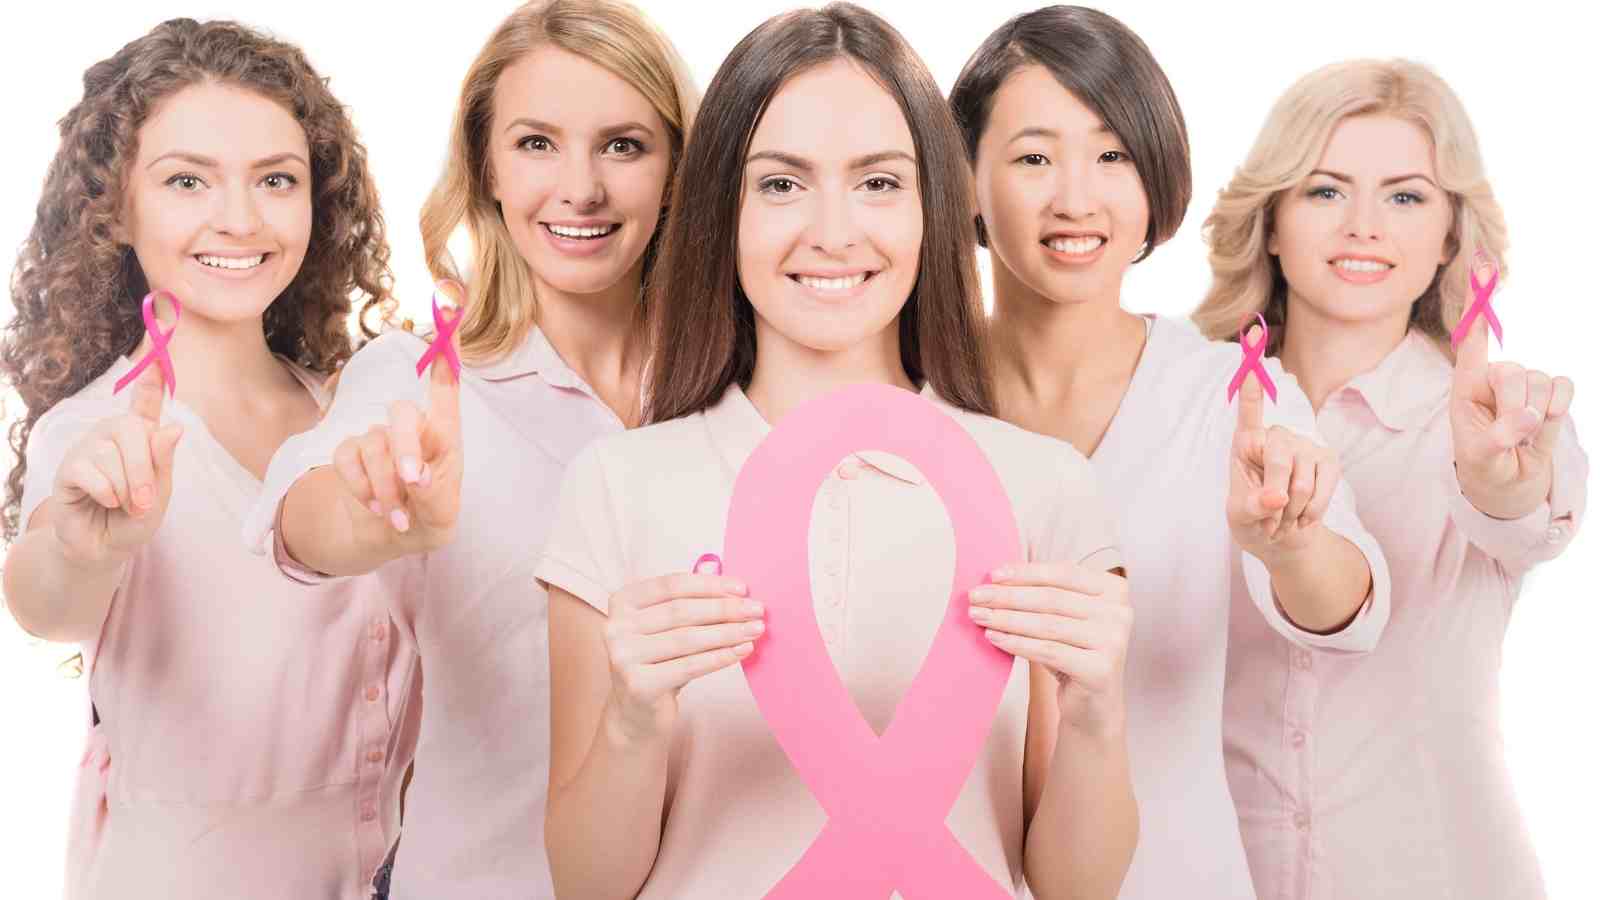 What Is Breast Cancer